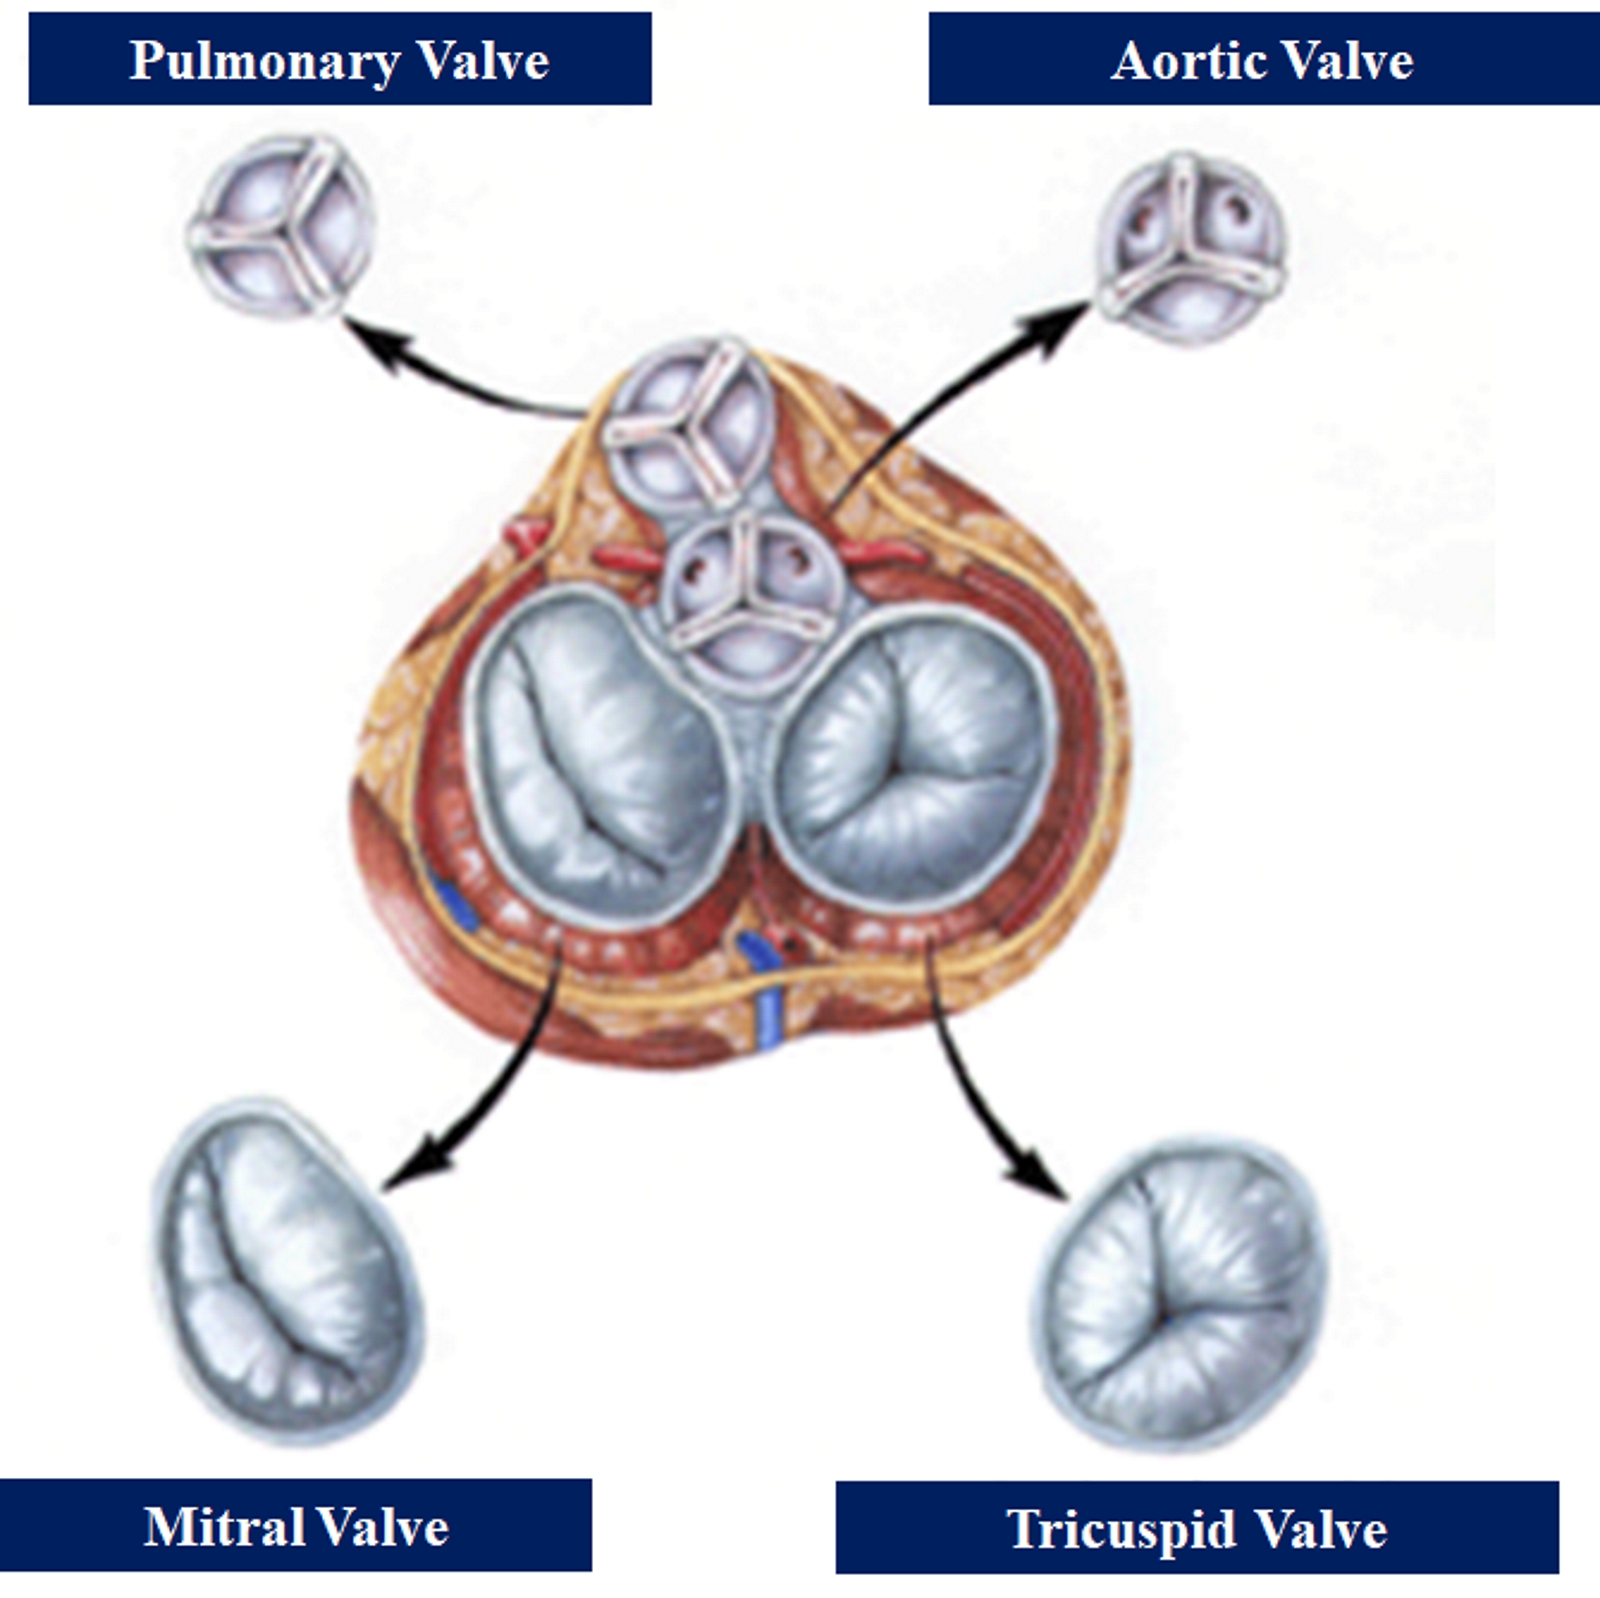 The image shows the four heart valves.